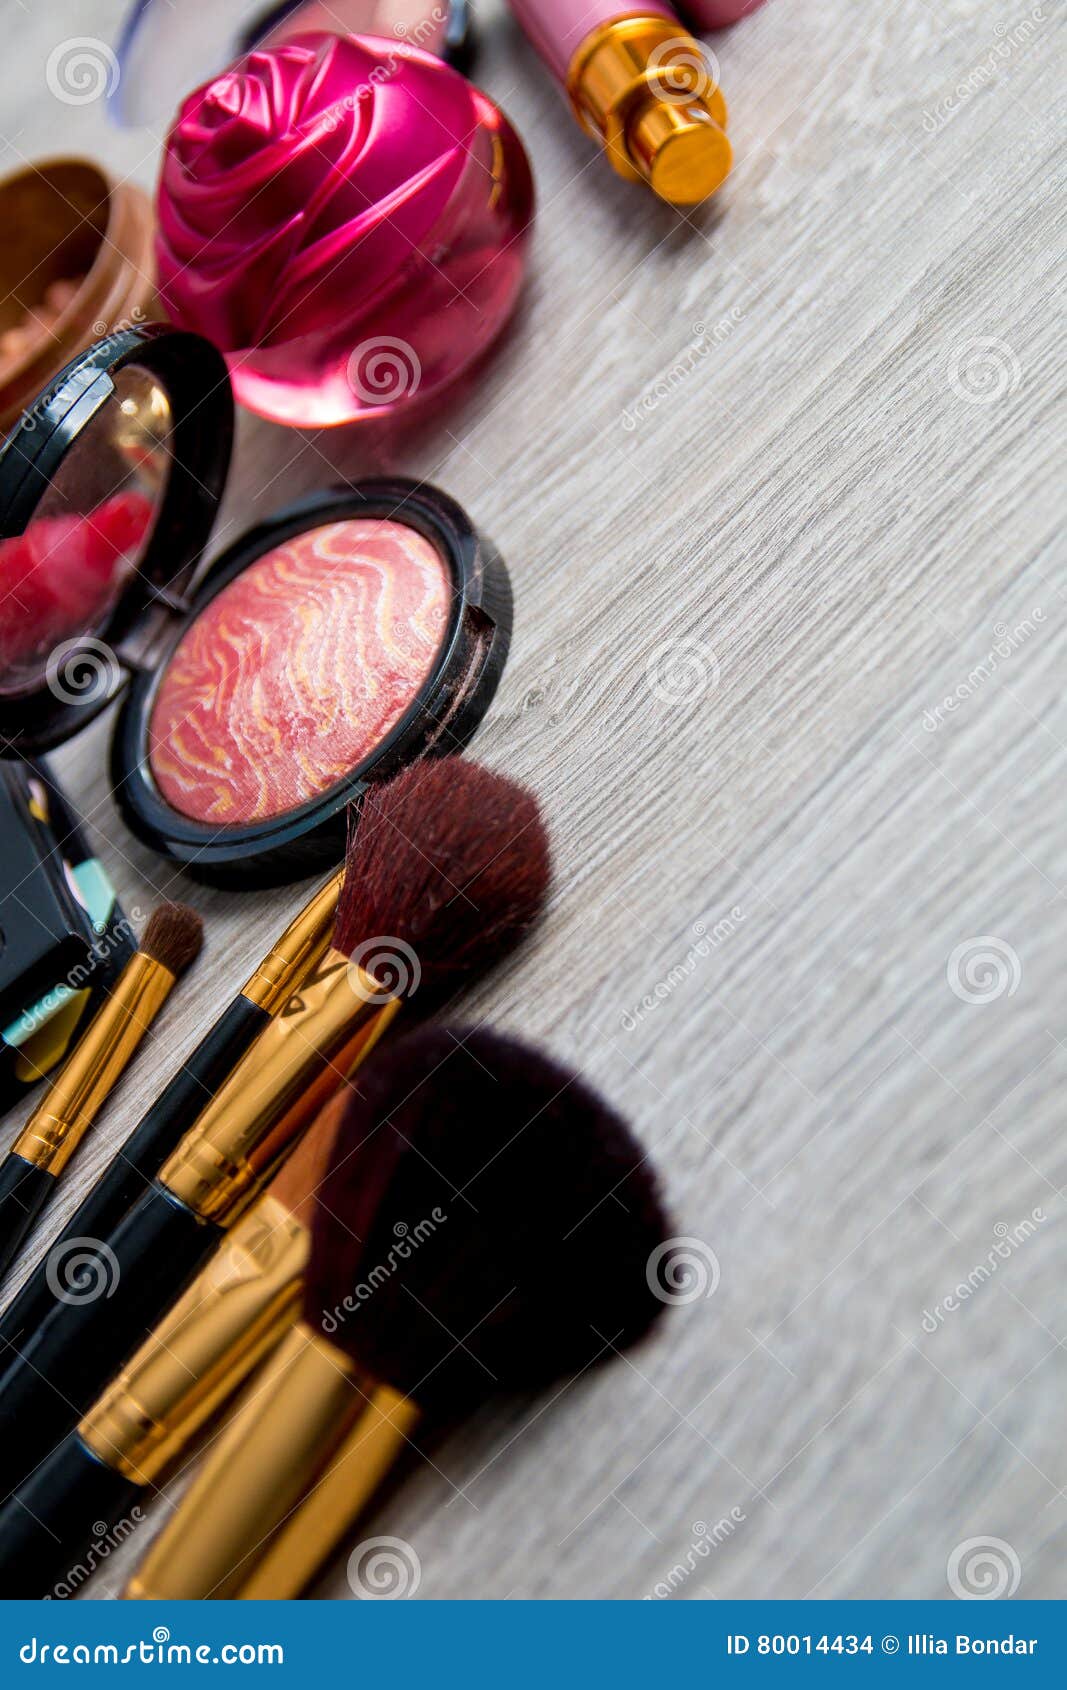 Set Of Decorative Cosmetics And Brushes On Grey Wooden Background